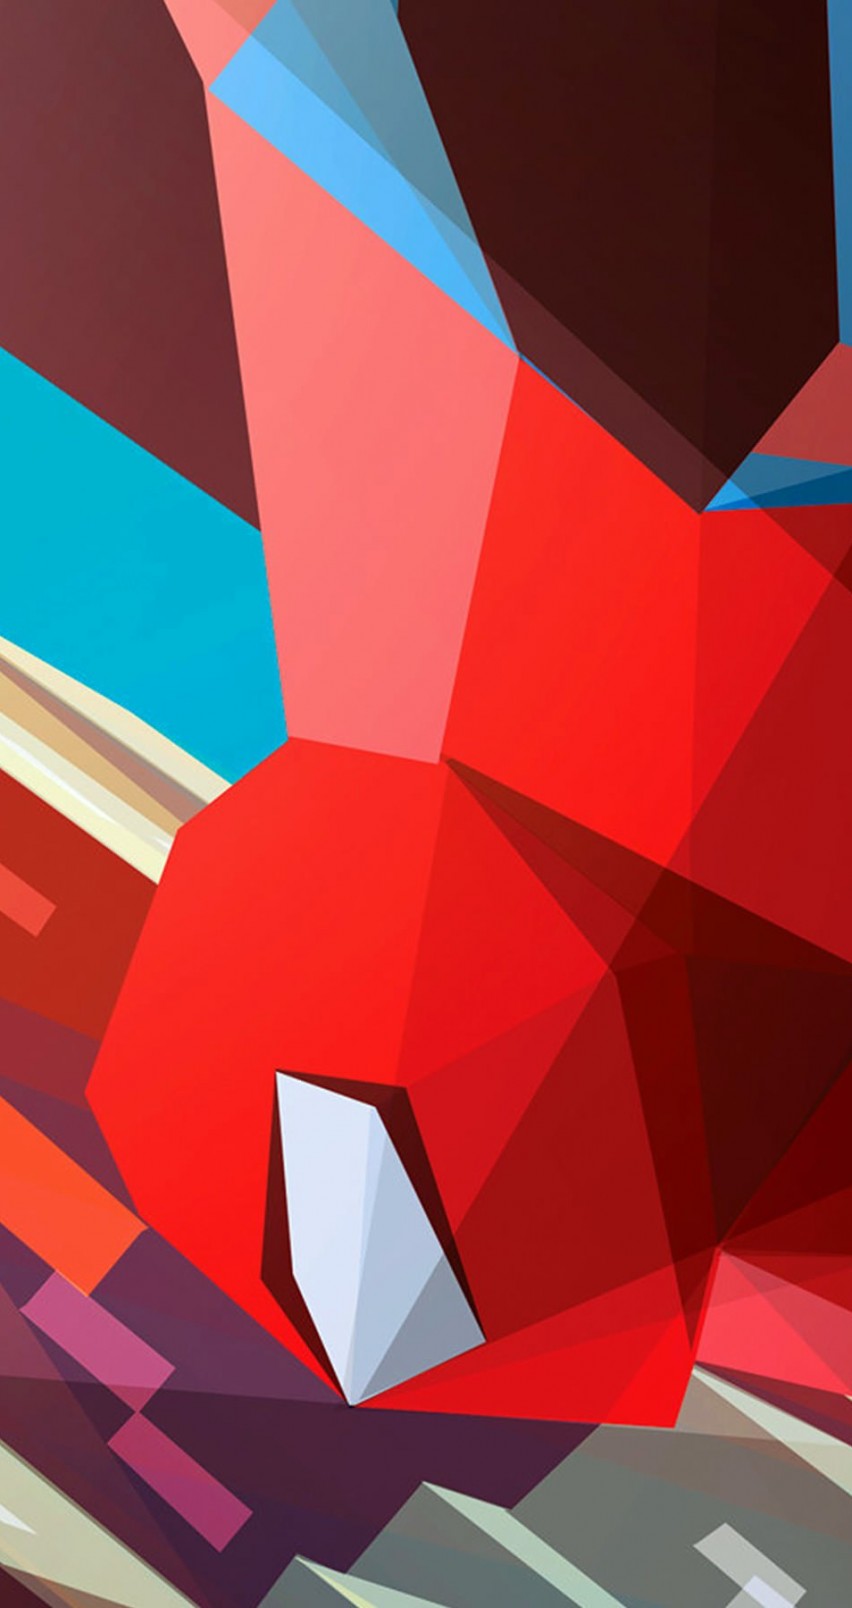 Spiderman Low Poly Illustration Wallpaper for Apple iPhone 6 / 6s